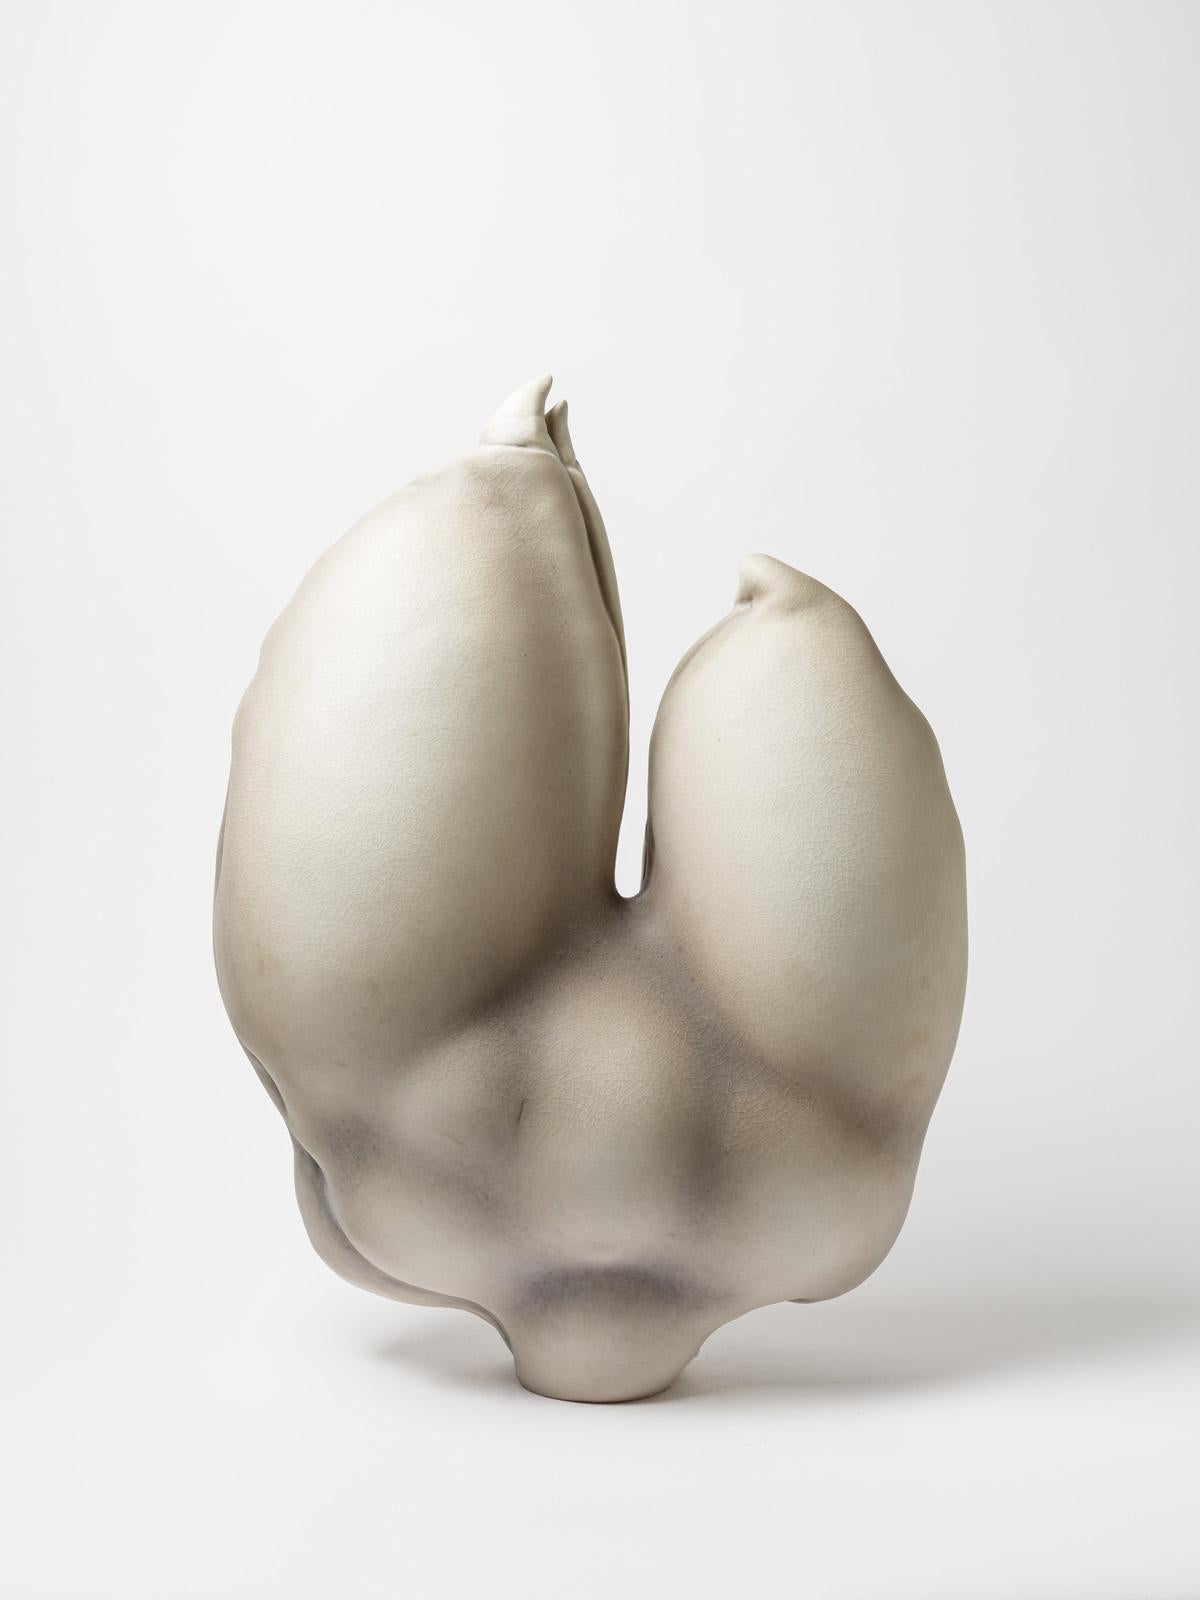 A porcelain sculpture by Wayne Fischer.
Perfect original conditions.
Signed.
Unique piece.
2018.

How can an inert object produce deeply unsuspecting, indecipherable, uncontrollable emotions?
Wayne Fischer is an artist who can create works